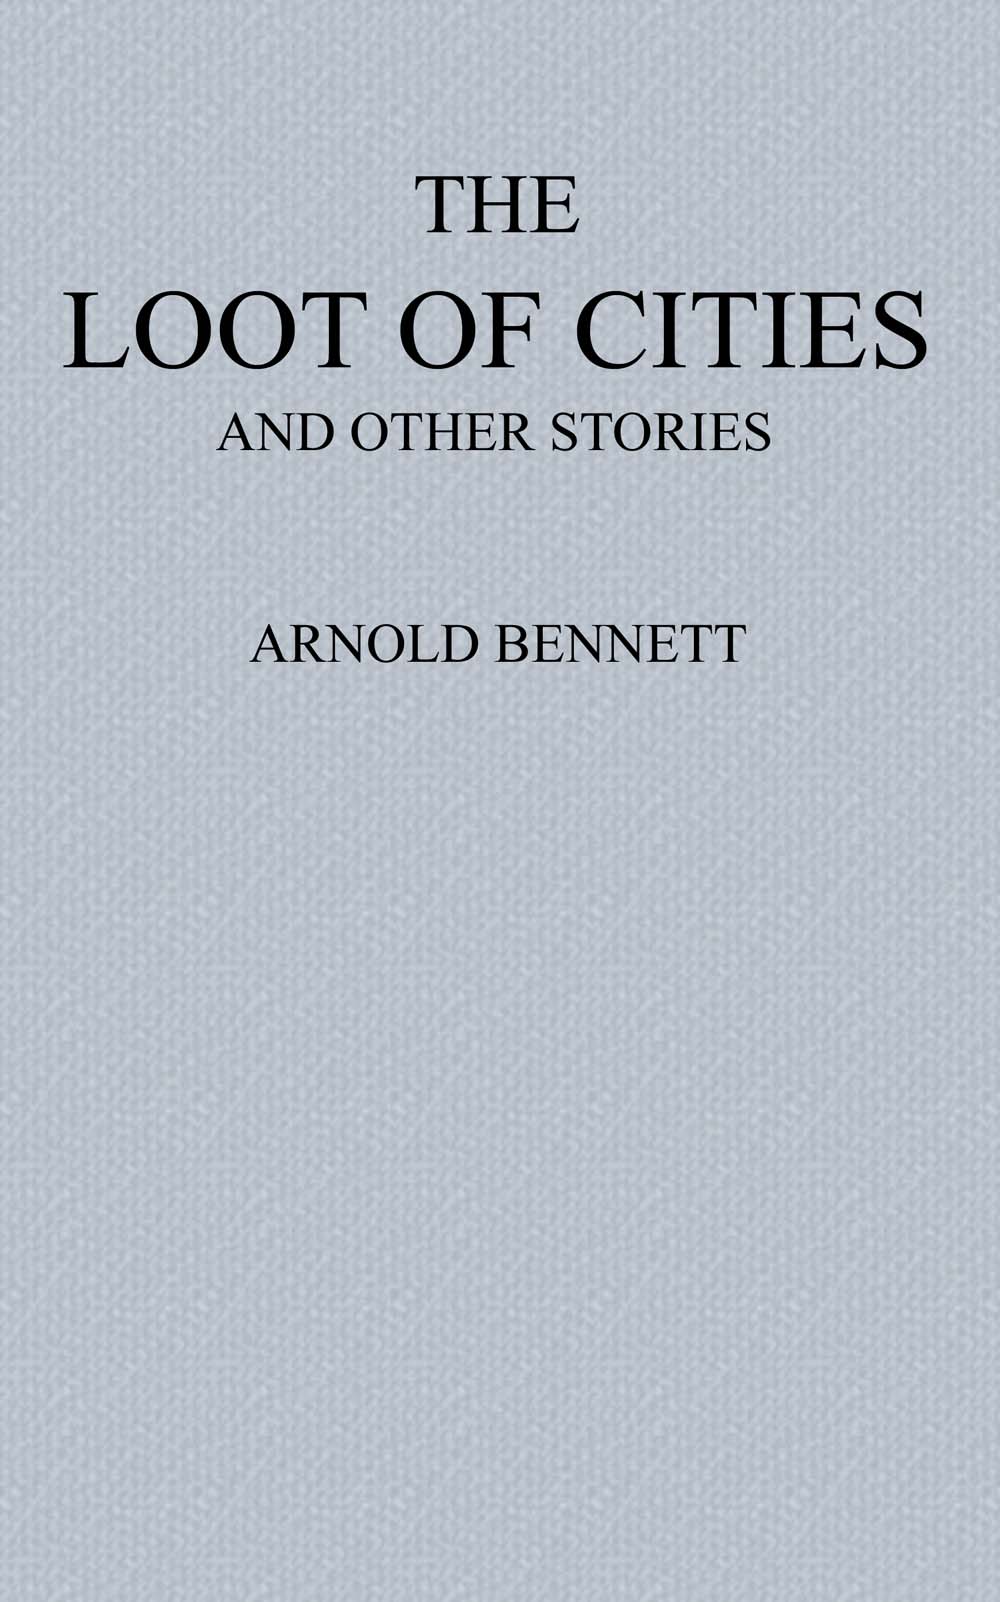 The Loot of Cities&#10;Being the Adventures of a Millionaire in Search of Joy (a Fantasia); and Other Stories